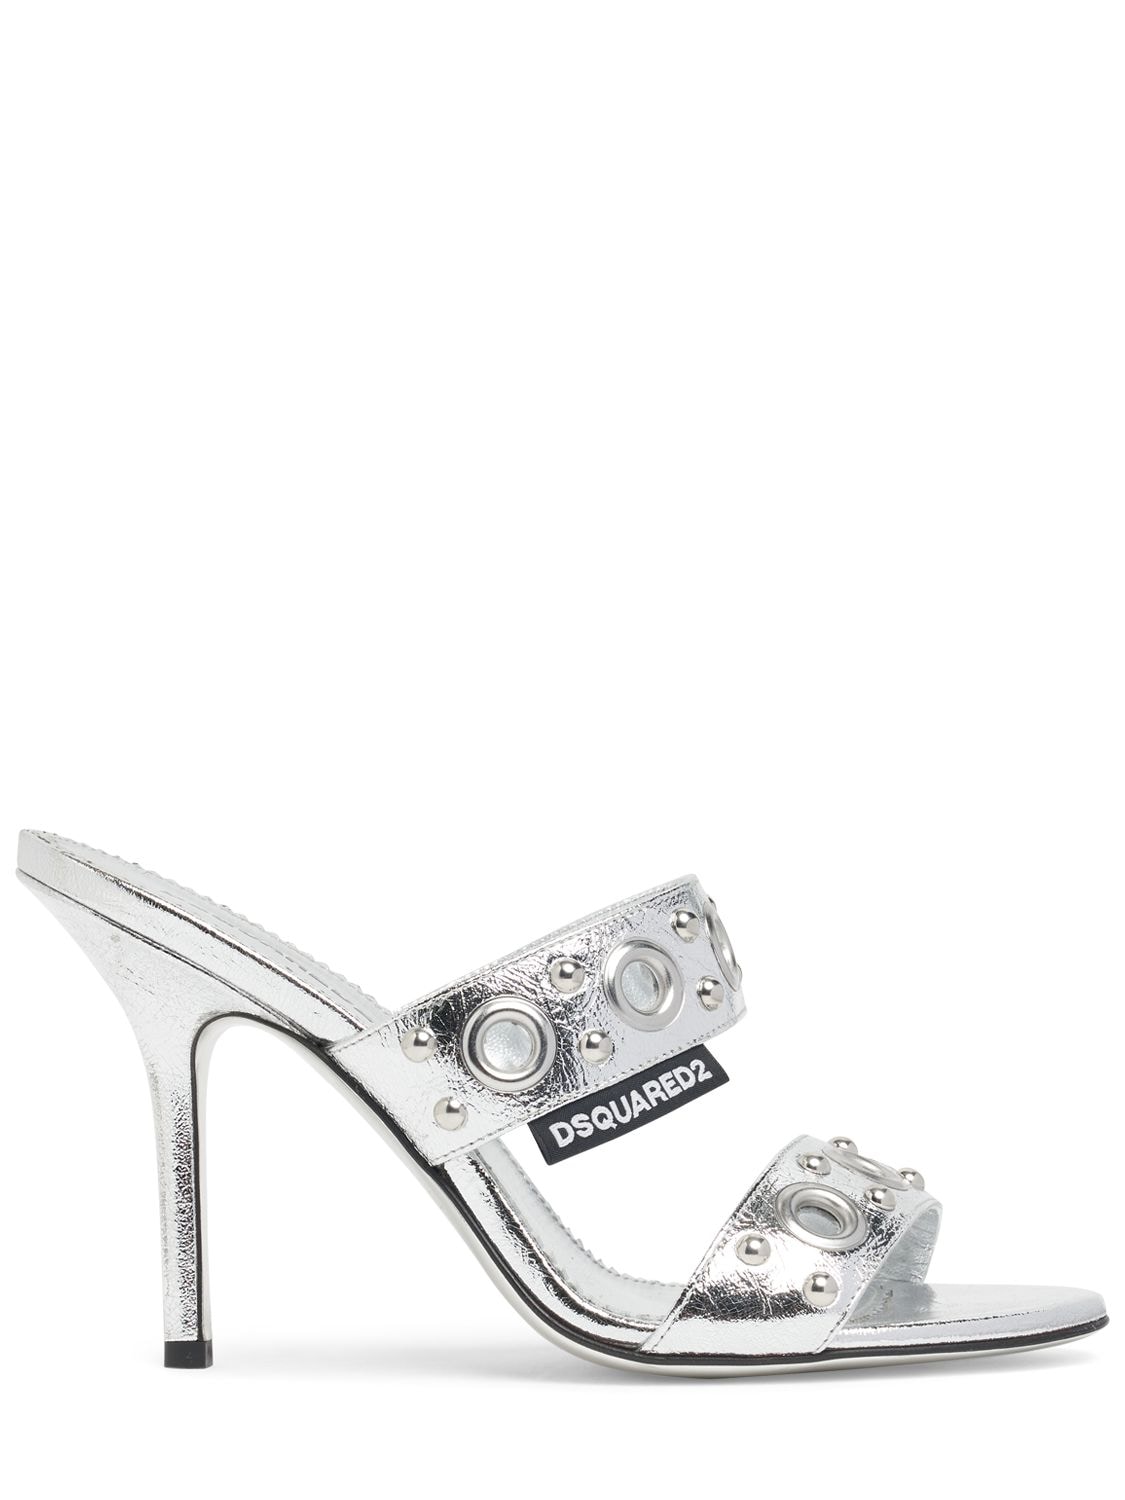 Dsquared2 110mm Laminated Mule Sandals In Silver